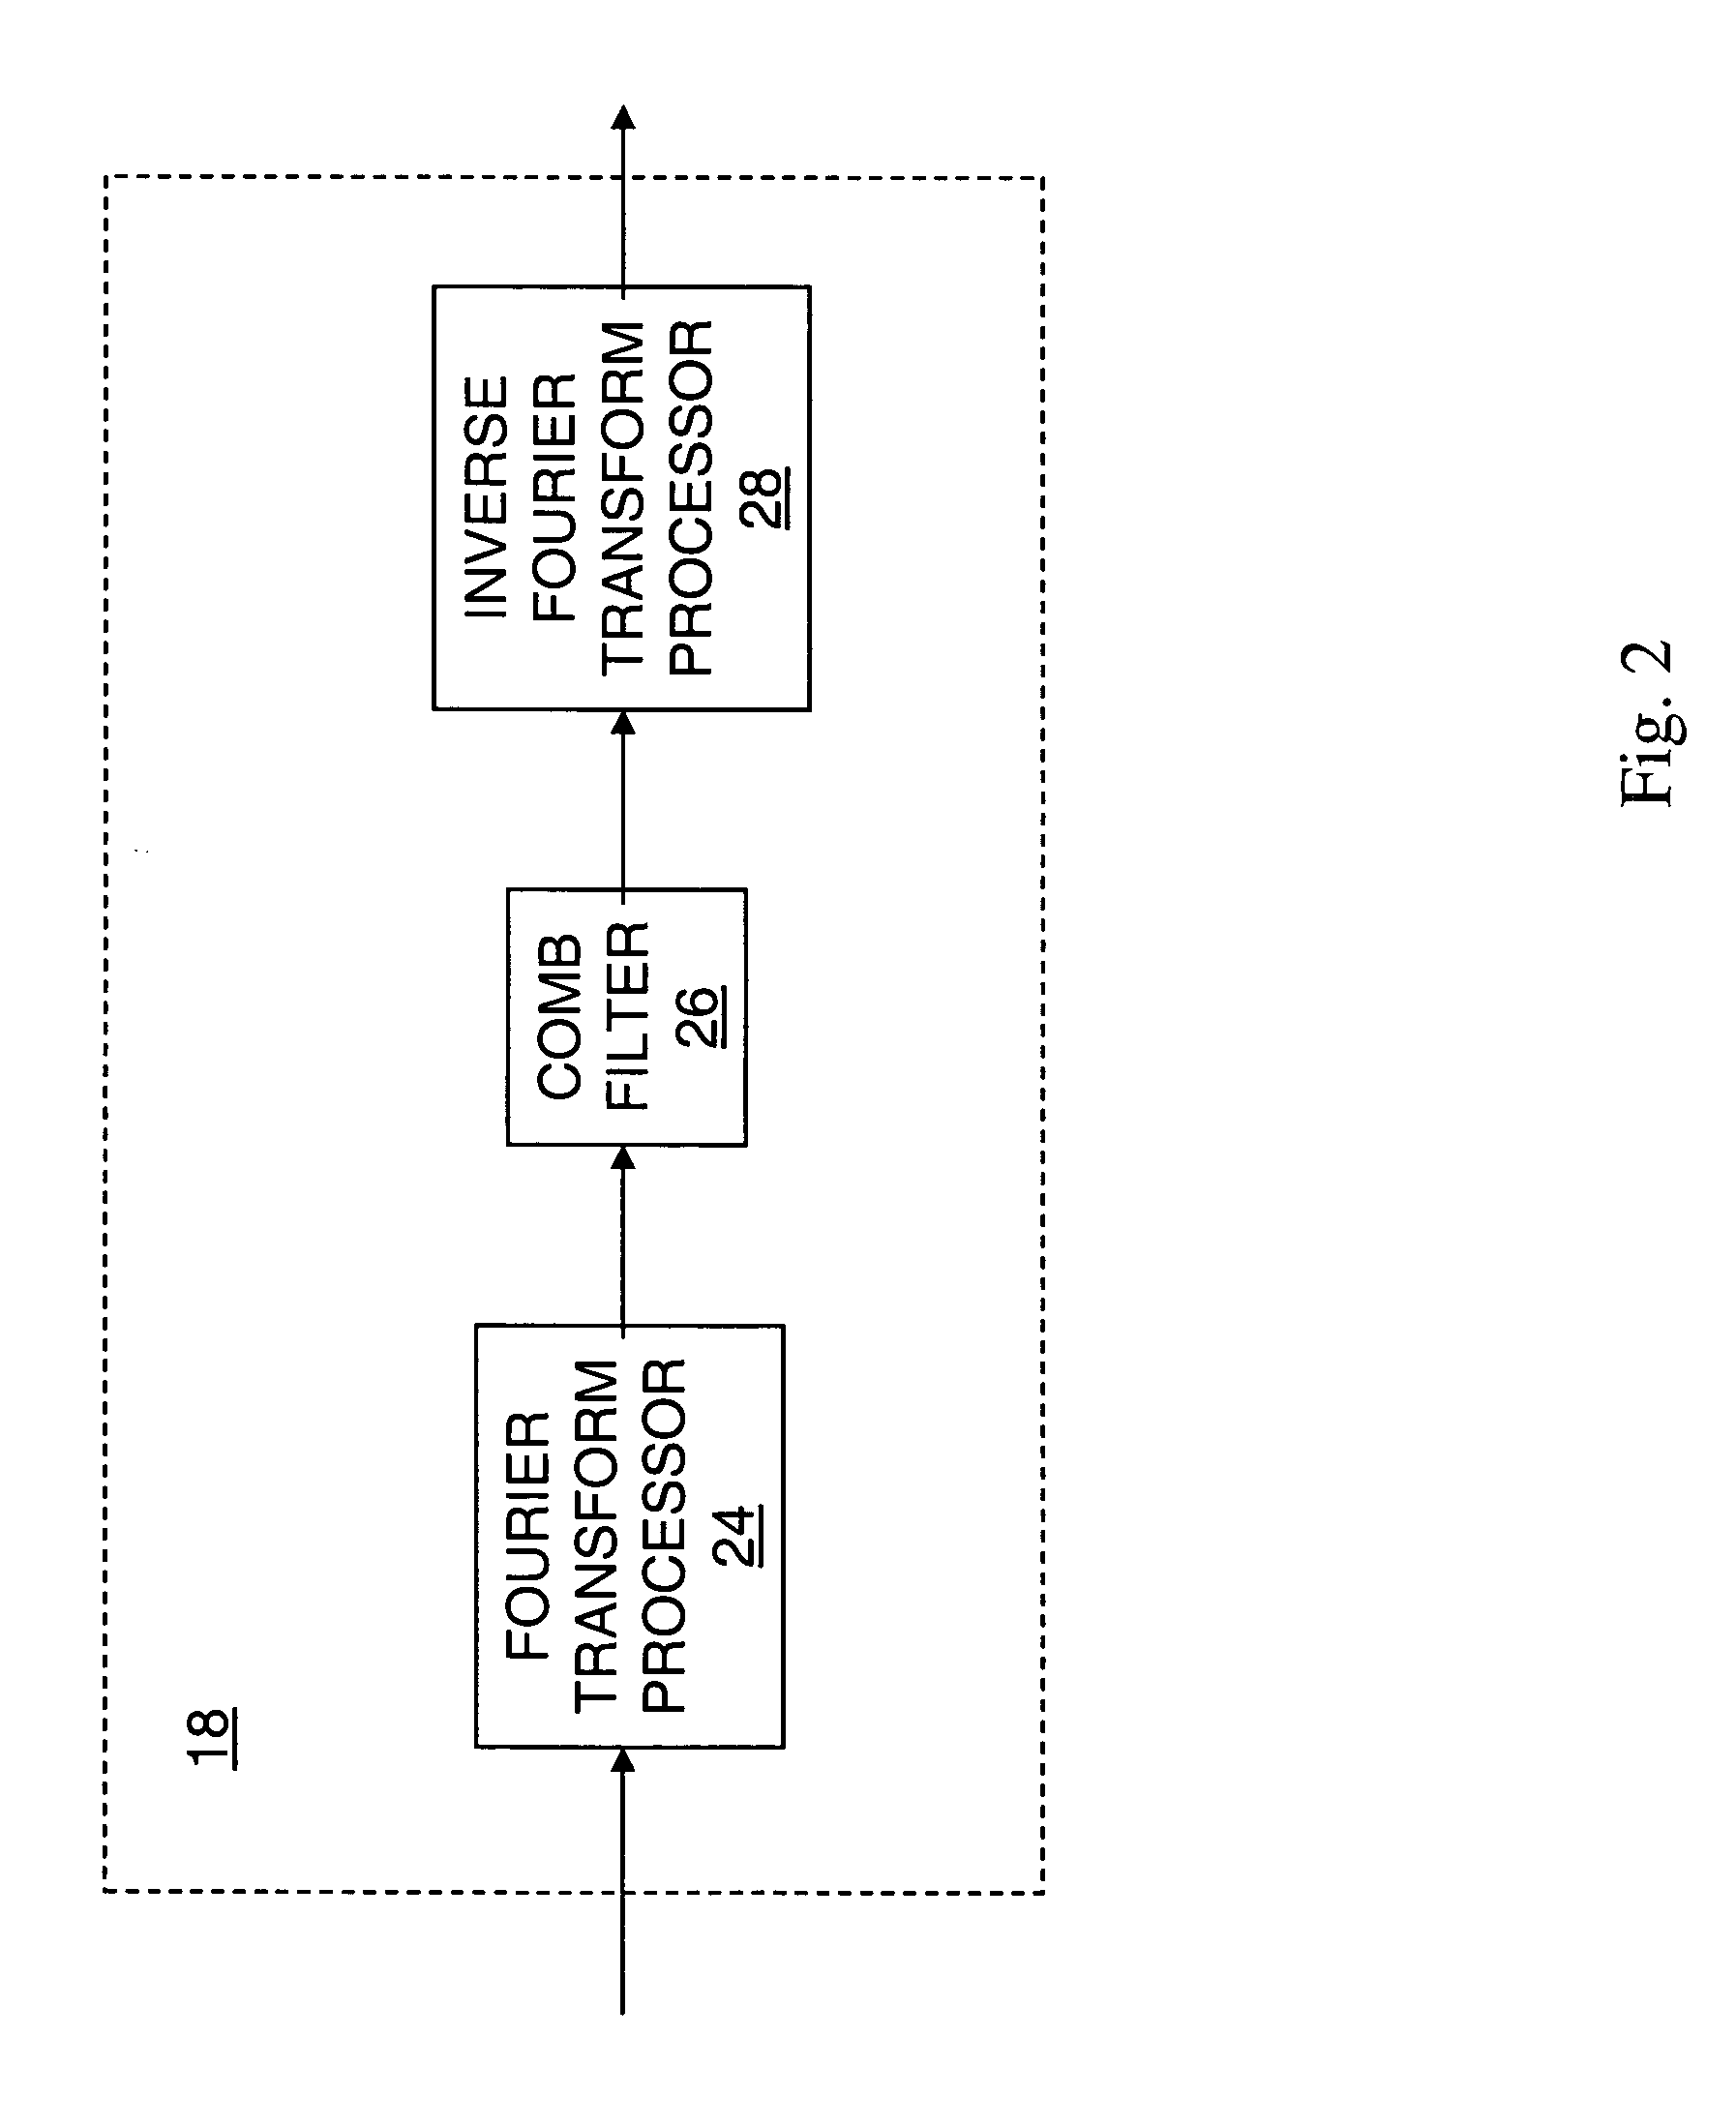 Methods and apparatuses using proximal probes